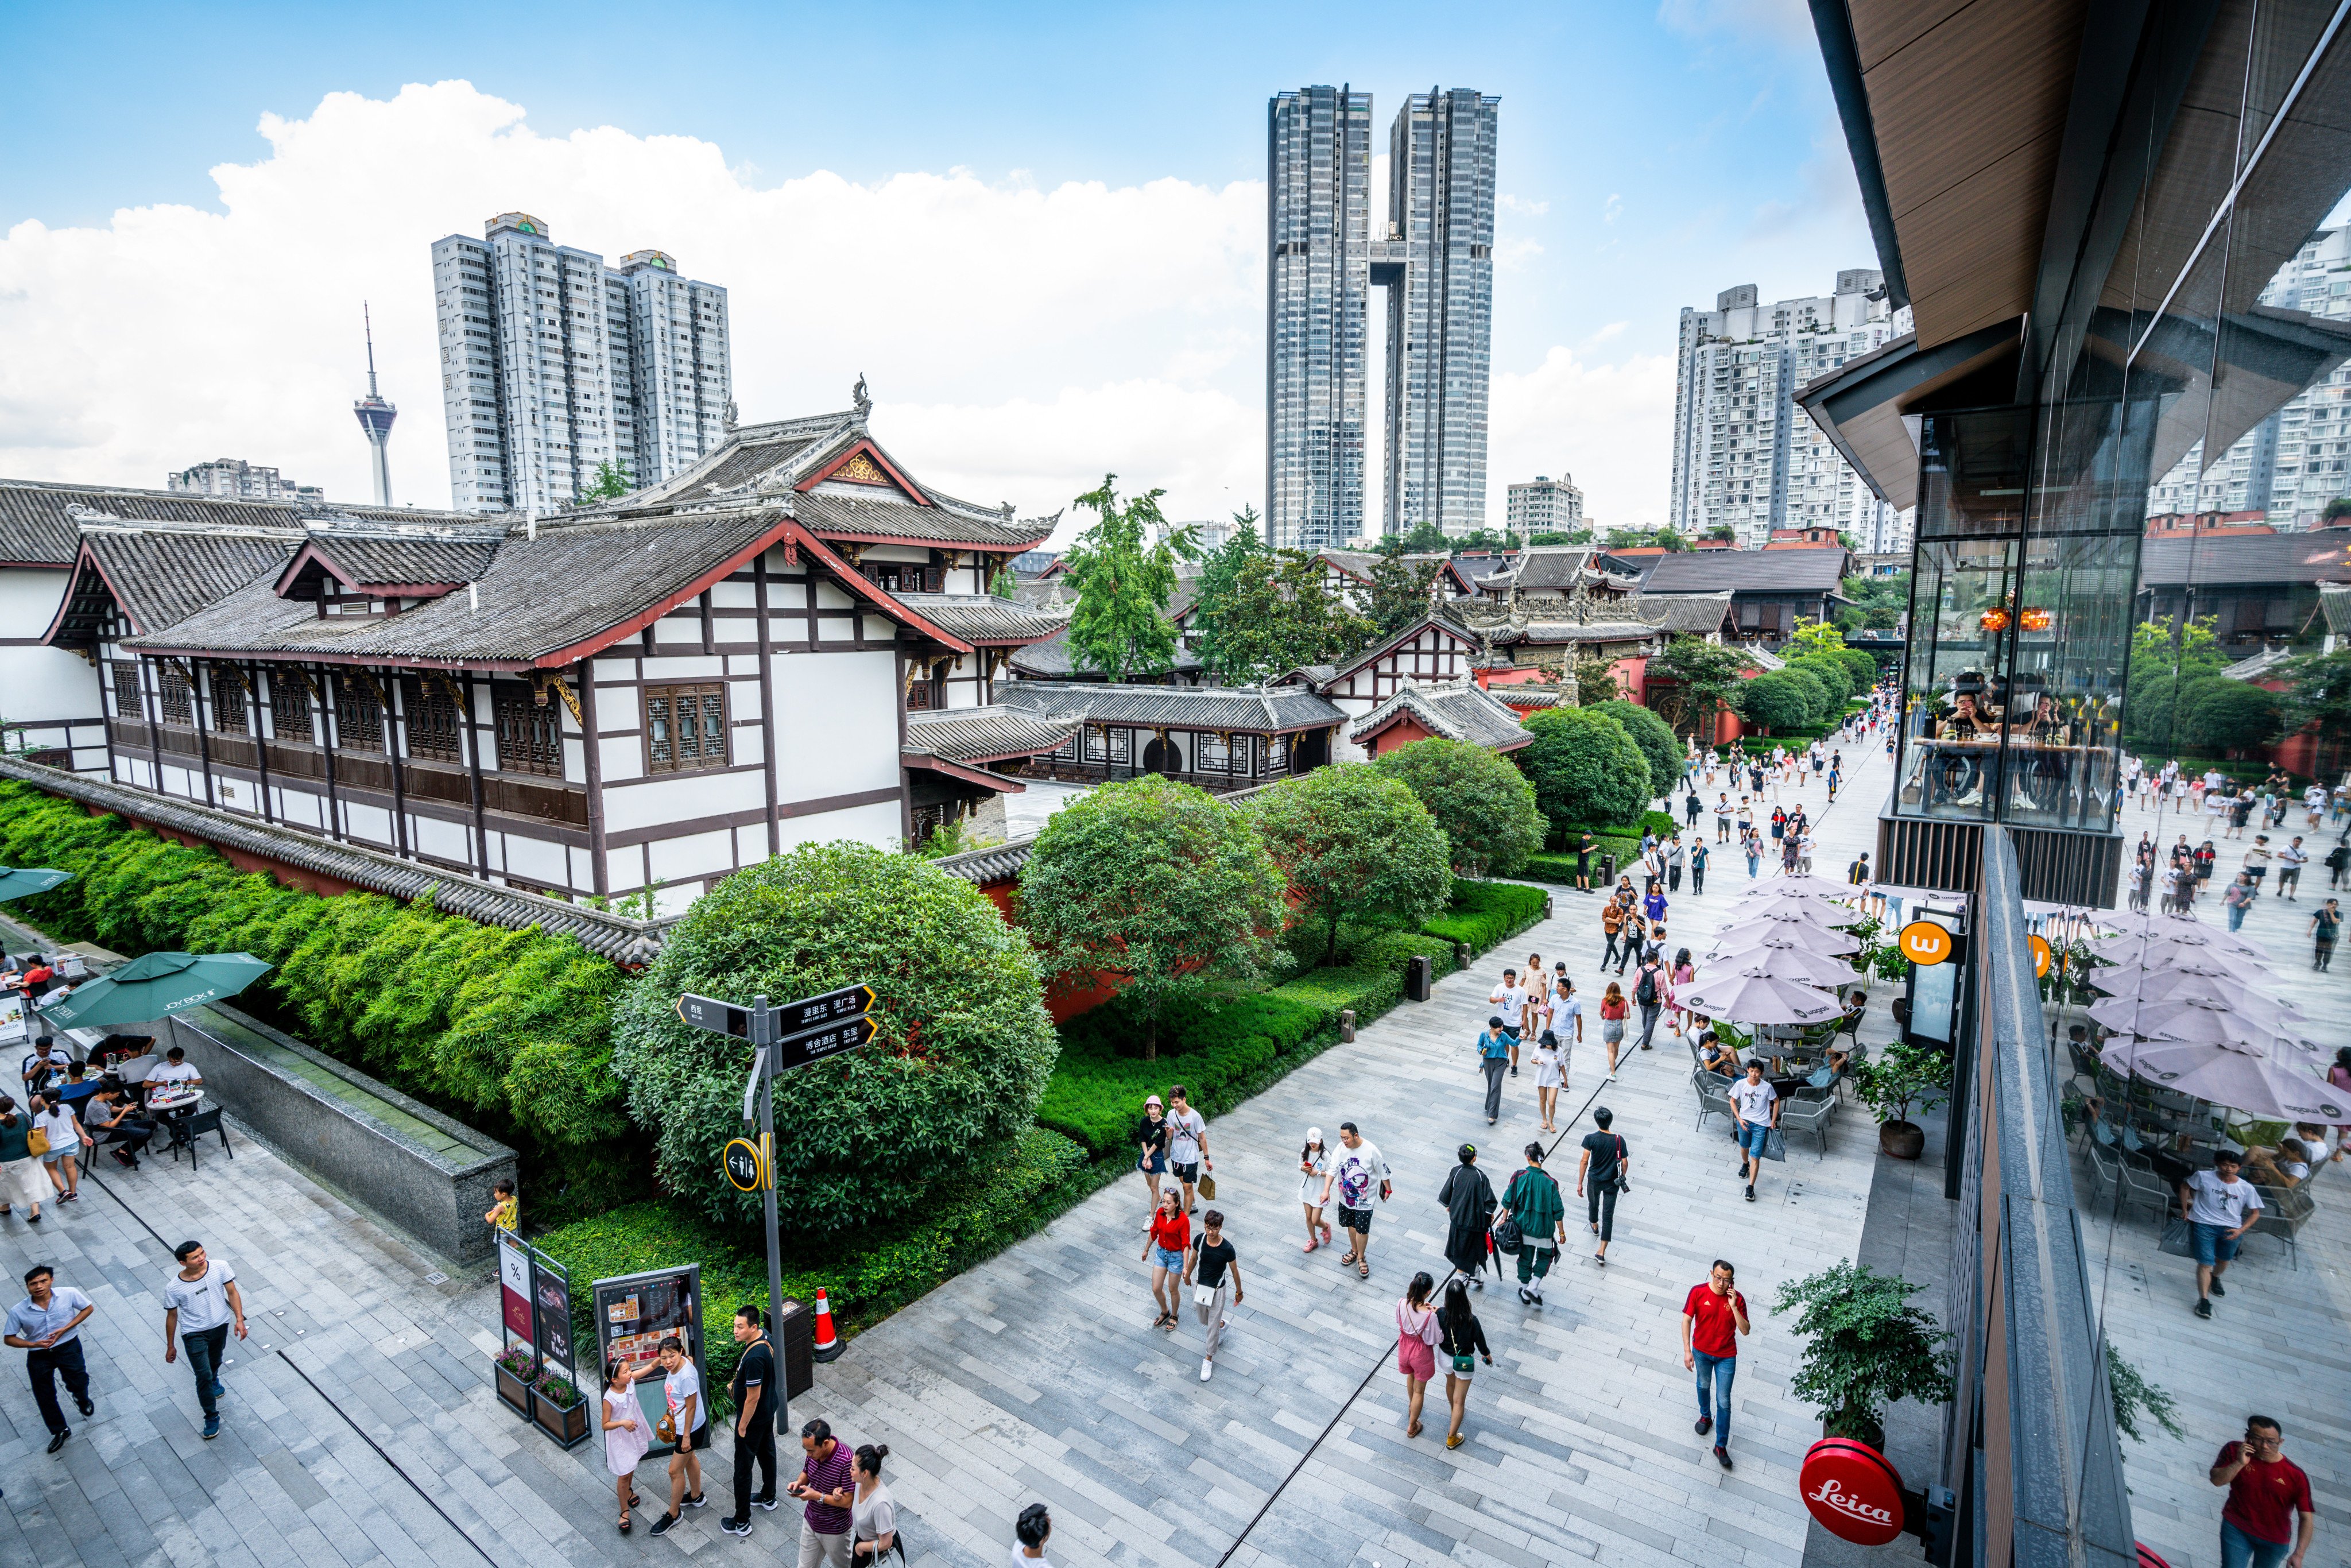 Chengdu joins other top-tier cities including Beijing and Shanghai, which eased curbs on their property market earlier through steps such as cuts in mortgage rates and by lowering the bar for home purchases. Photo: Shutterstock Images